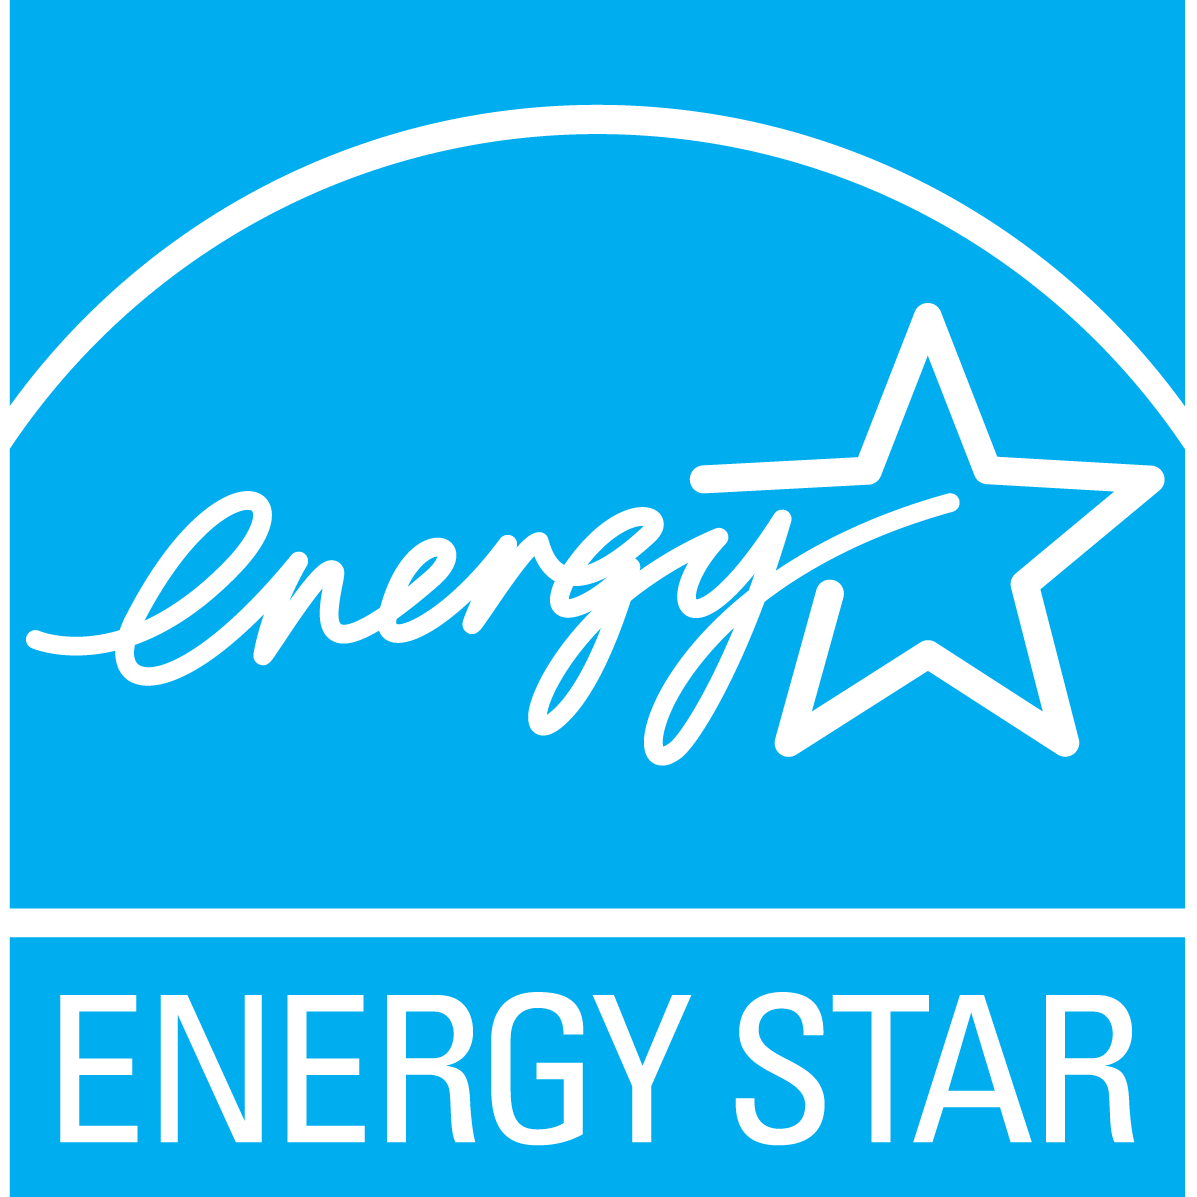 How a product earns the energy star label